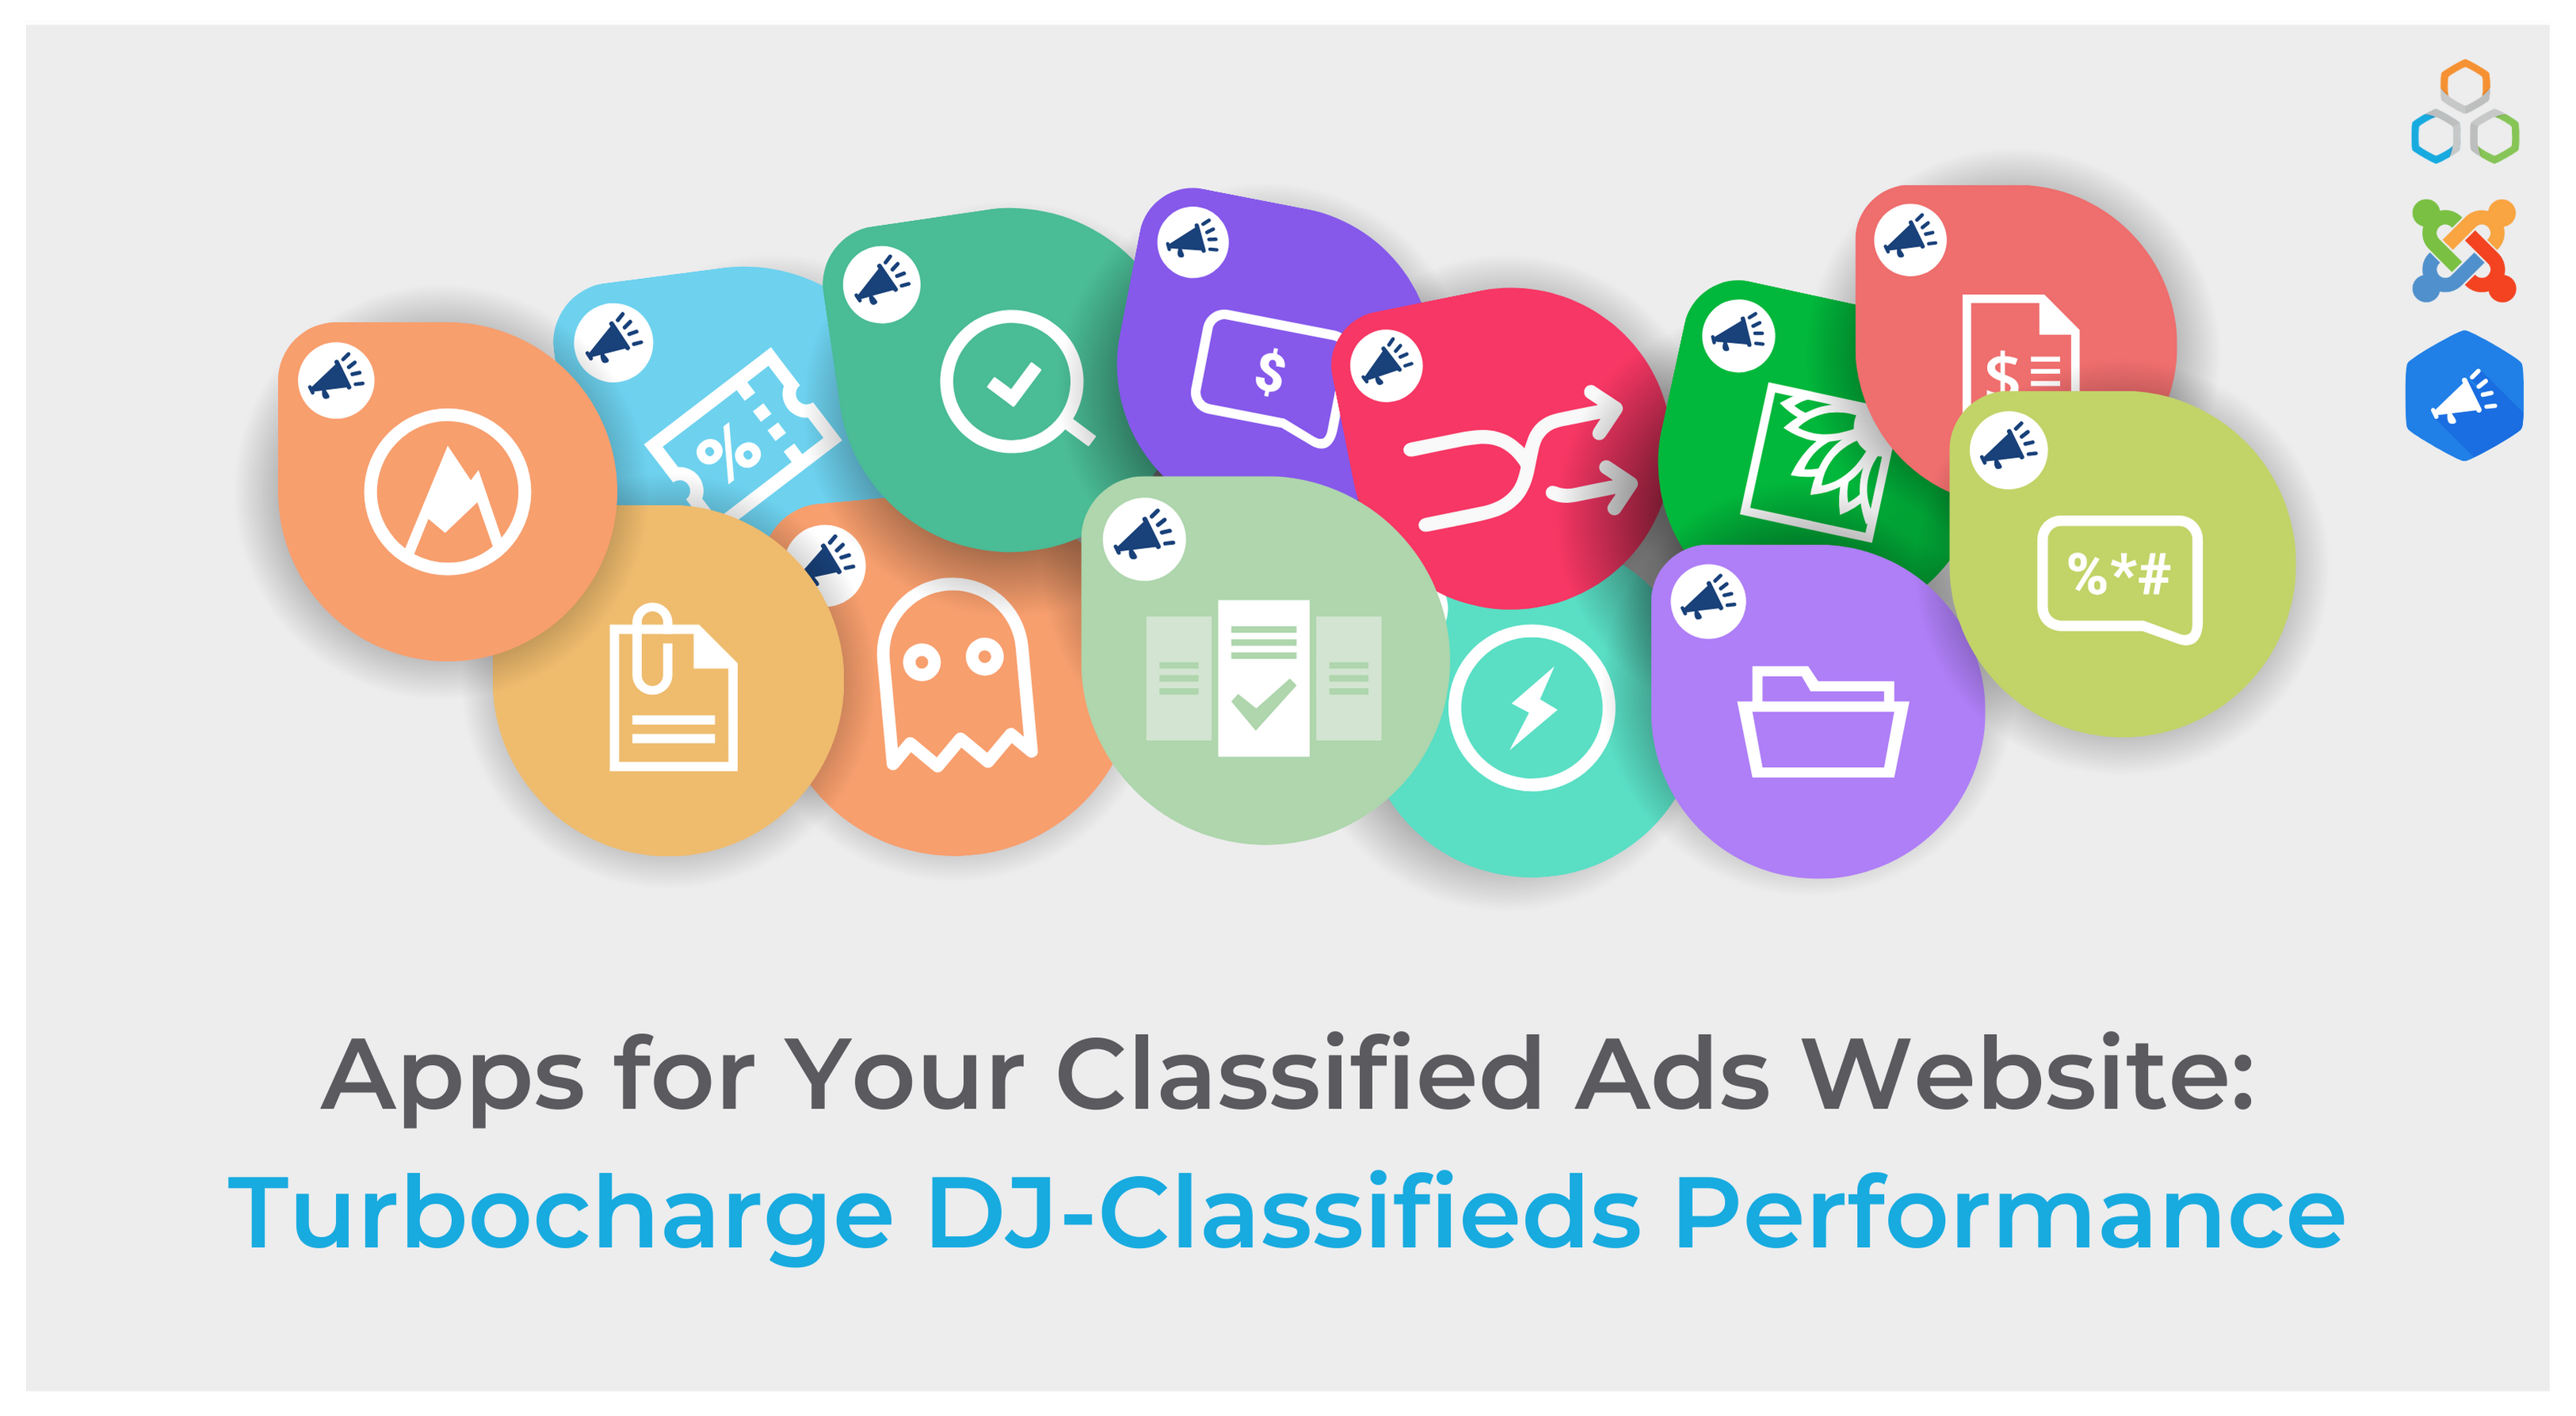 Enhance DJ-Classifieds performance with Apps for Your Classified Ads Website